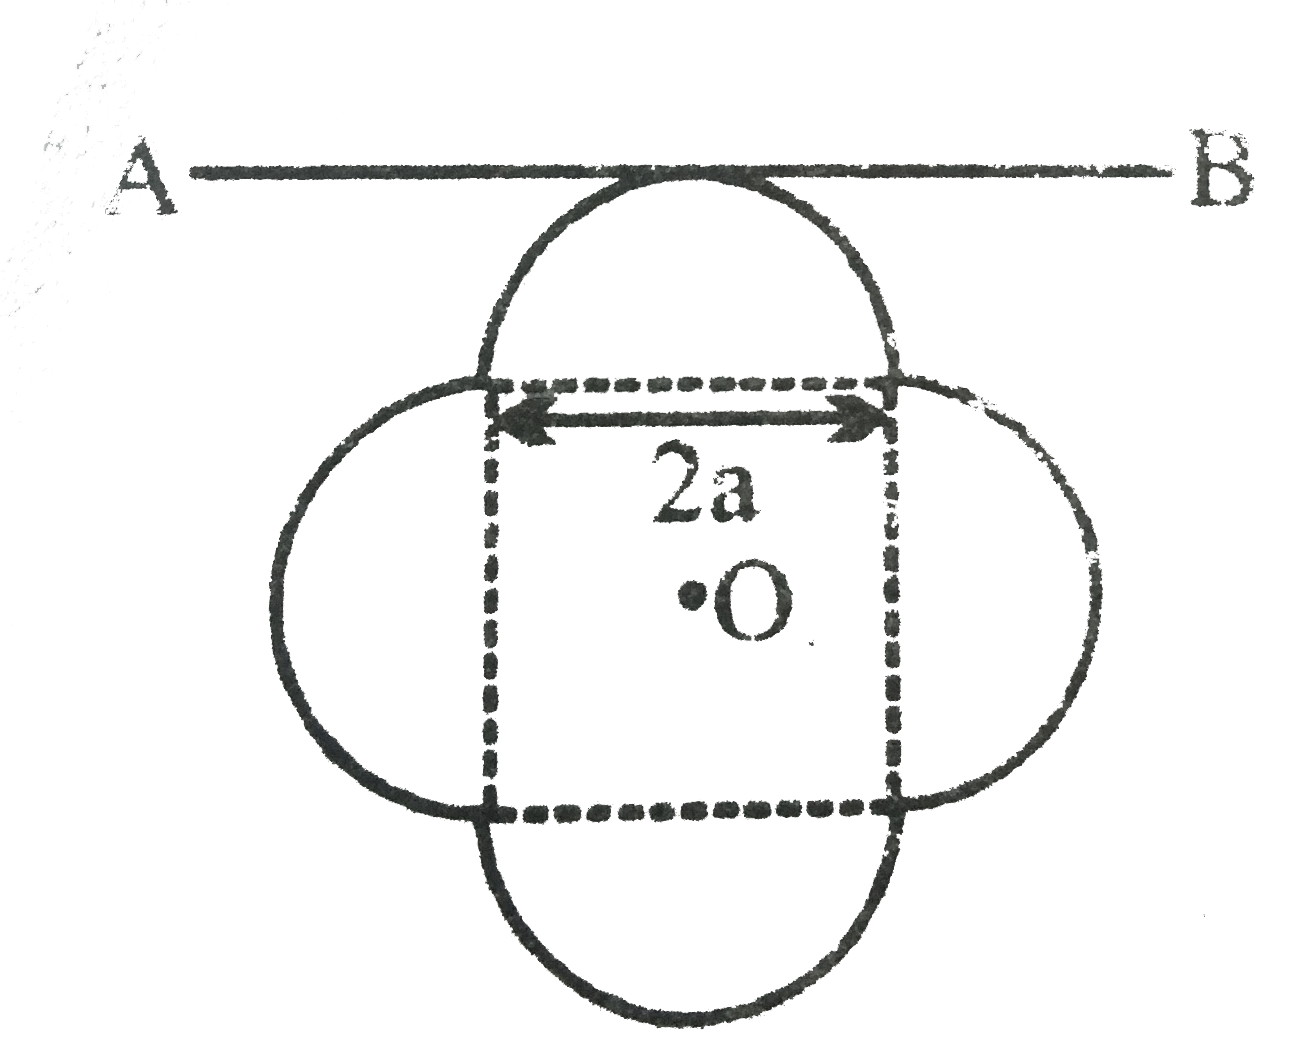 A symmetric lamina of mass M consists of a square shape with a semicircular section over each of the edge of the square as in fig. The side of the square is 2 a.   The moment of inertia of the lamina about an axis through its centre of mass and perpendicular to the plane is 1.6 Ma^(2). The moment of inertia of the lamina about the tangent AB in the plane of lamina is.   .